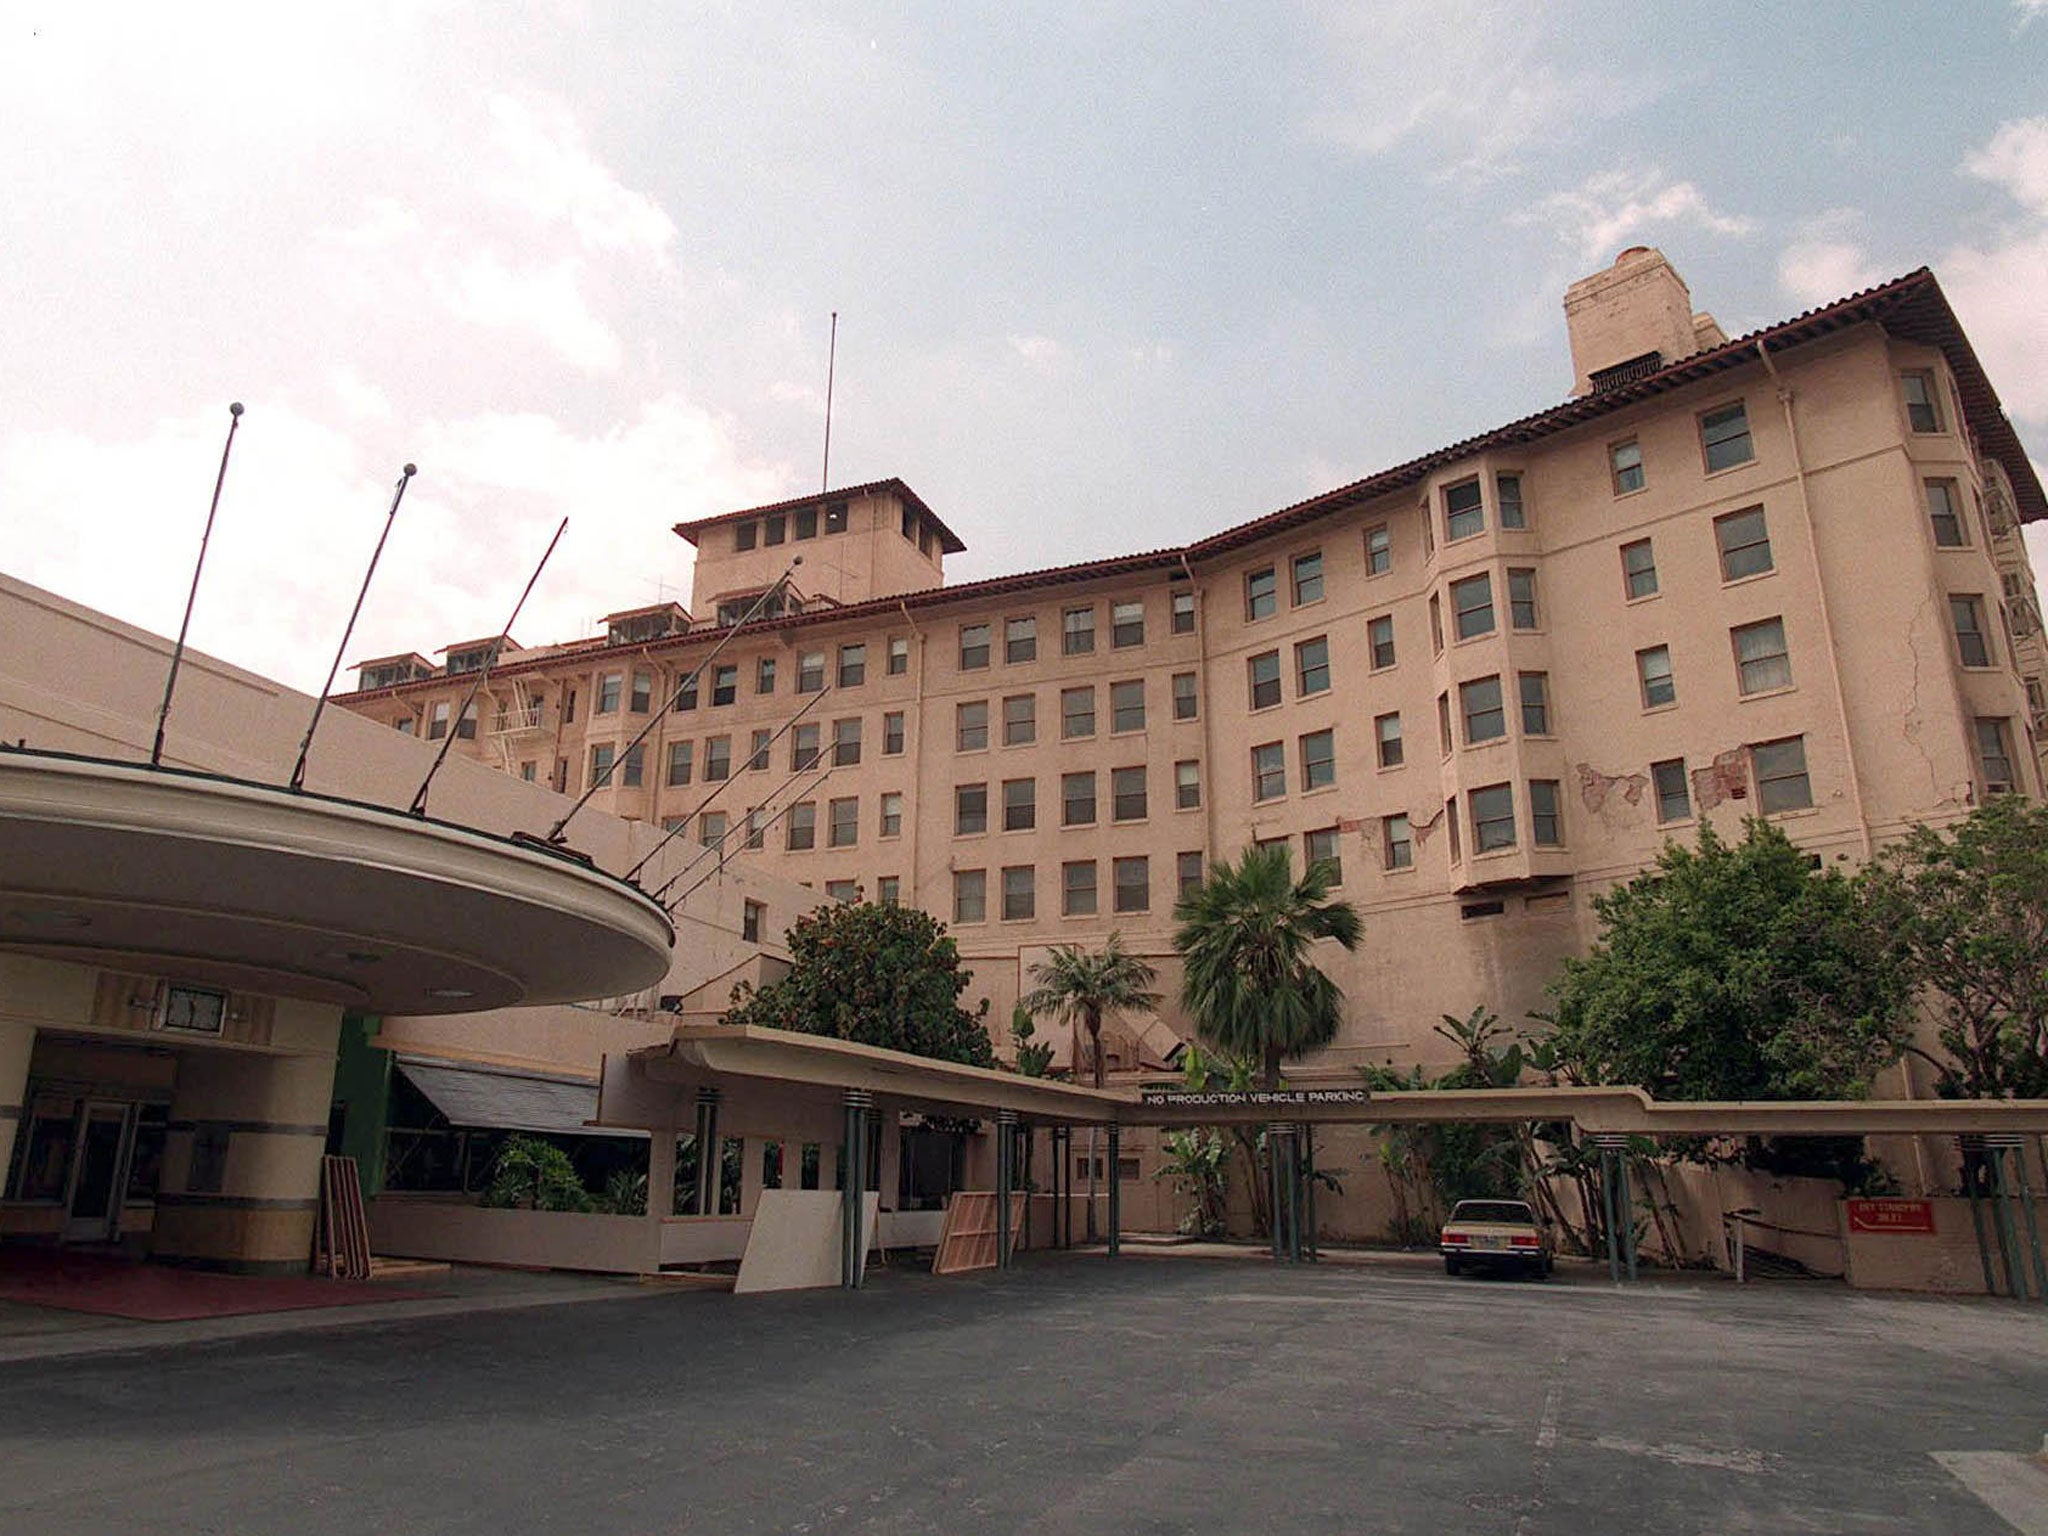 On 5 June, 1968, who died in the kitchen of the Ambassador Hotel (pictured) in Los Angeles?